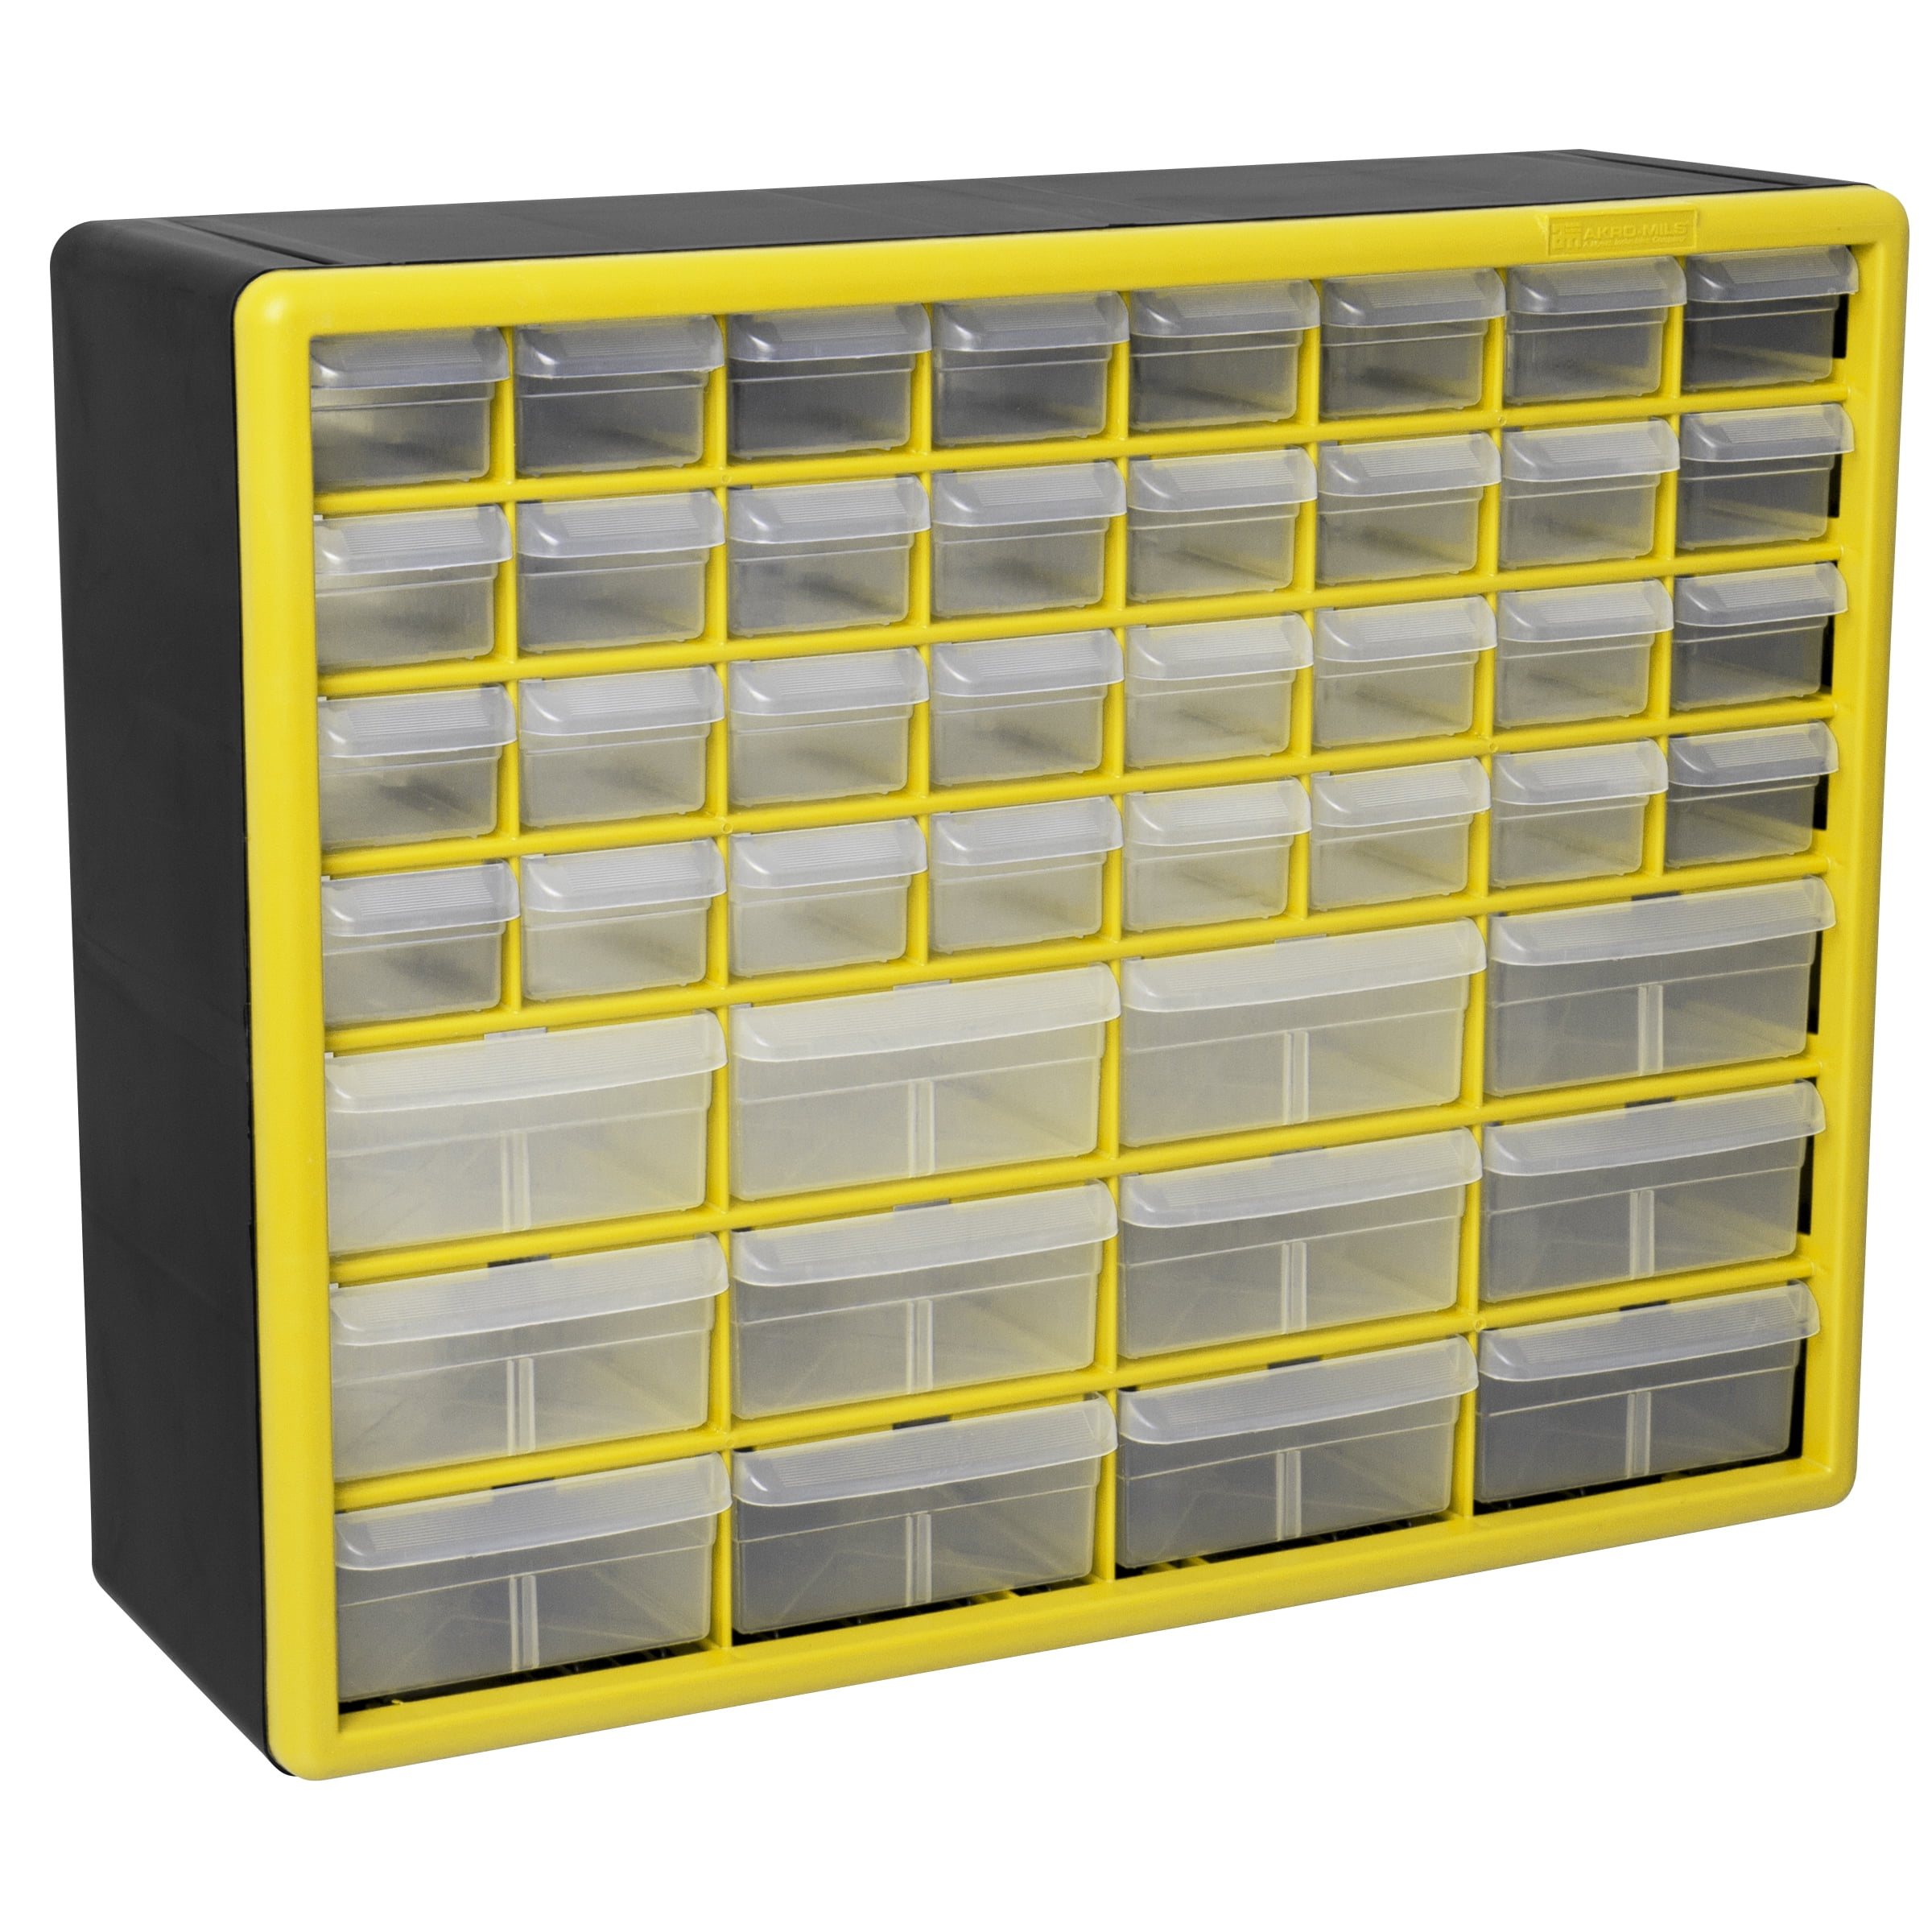 Akro-Mils 44 Drawer Plastic Cabinet Storage Organizer with Drawers for Hardware, Small Parts, Craft Supplies, Yellow - image 1 of 10